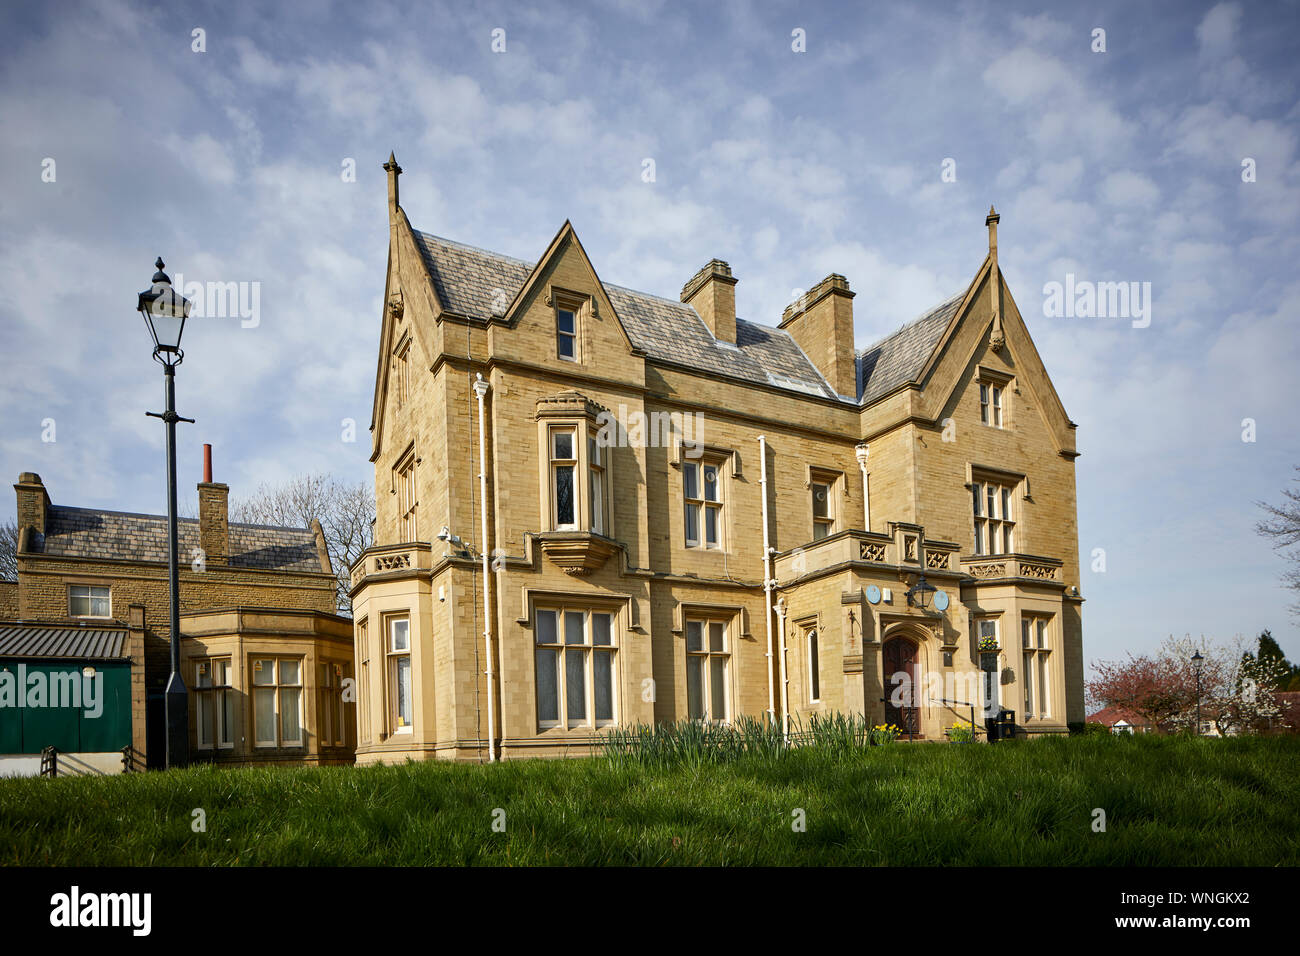 Tameside Ryecroft Hall Manchester Rd, Audenshaw, beautiful Grade II listed civic building donated to the people of Audenshaw by Austin Hopkinson in 19 Stock Photo